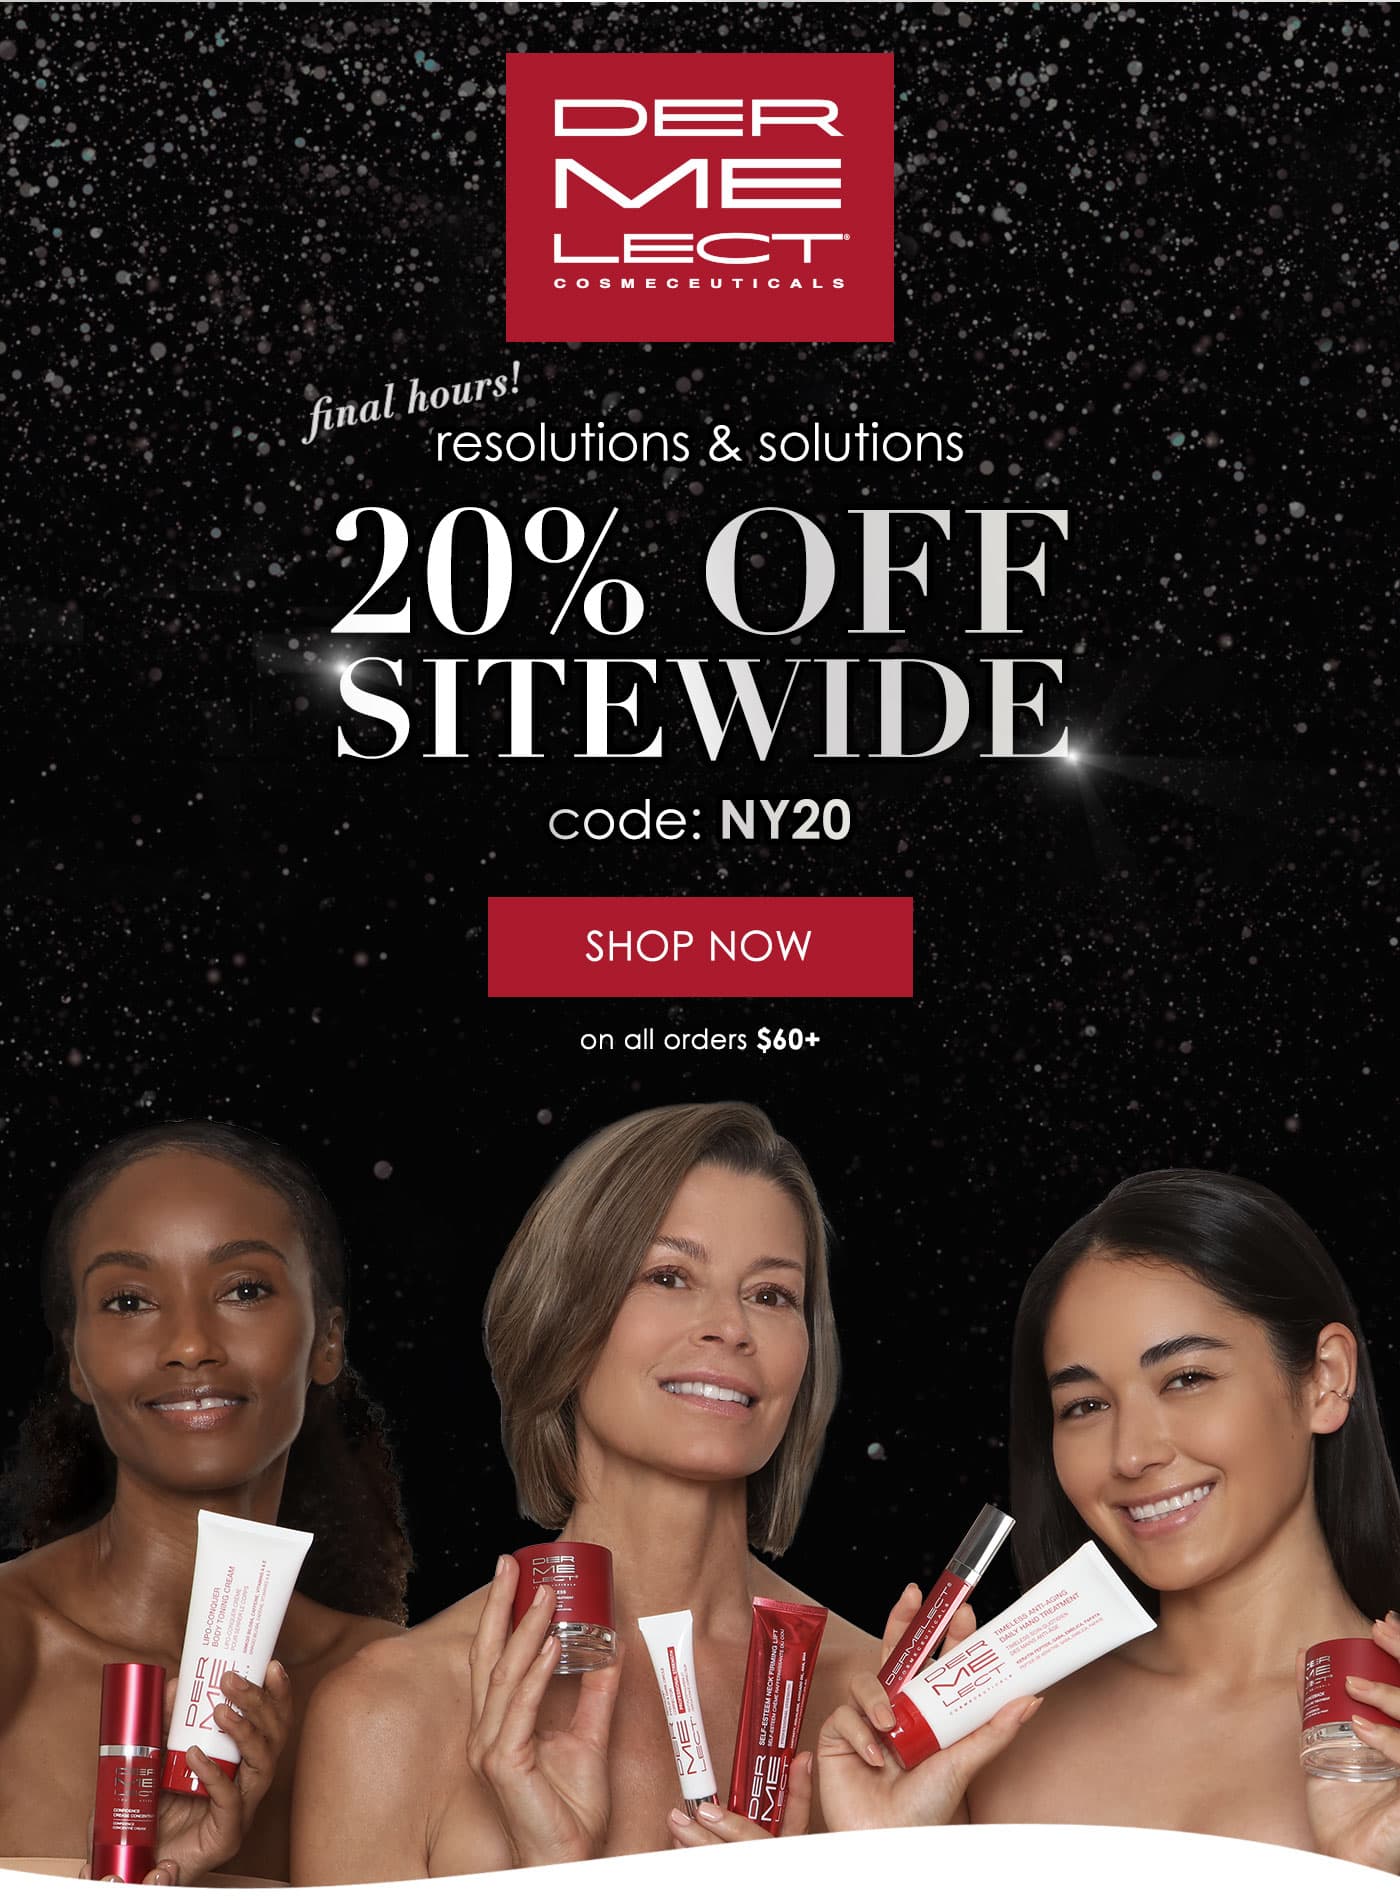 Resolutions and Solutions! Take 20 Percent Off SITEWIDE